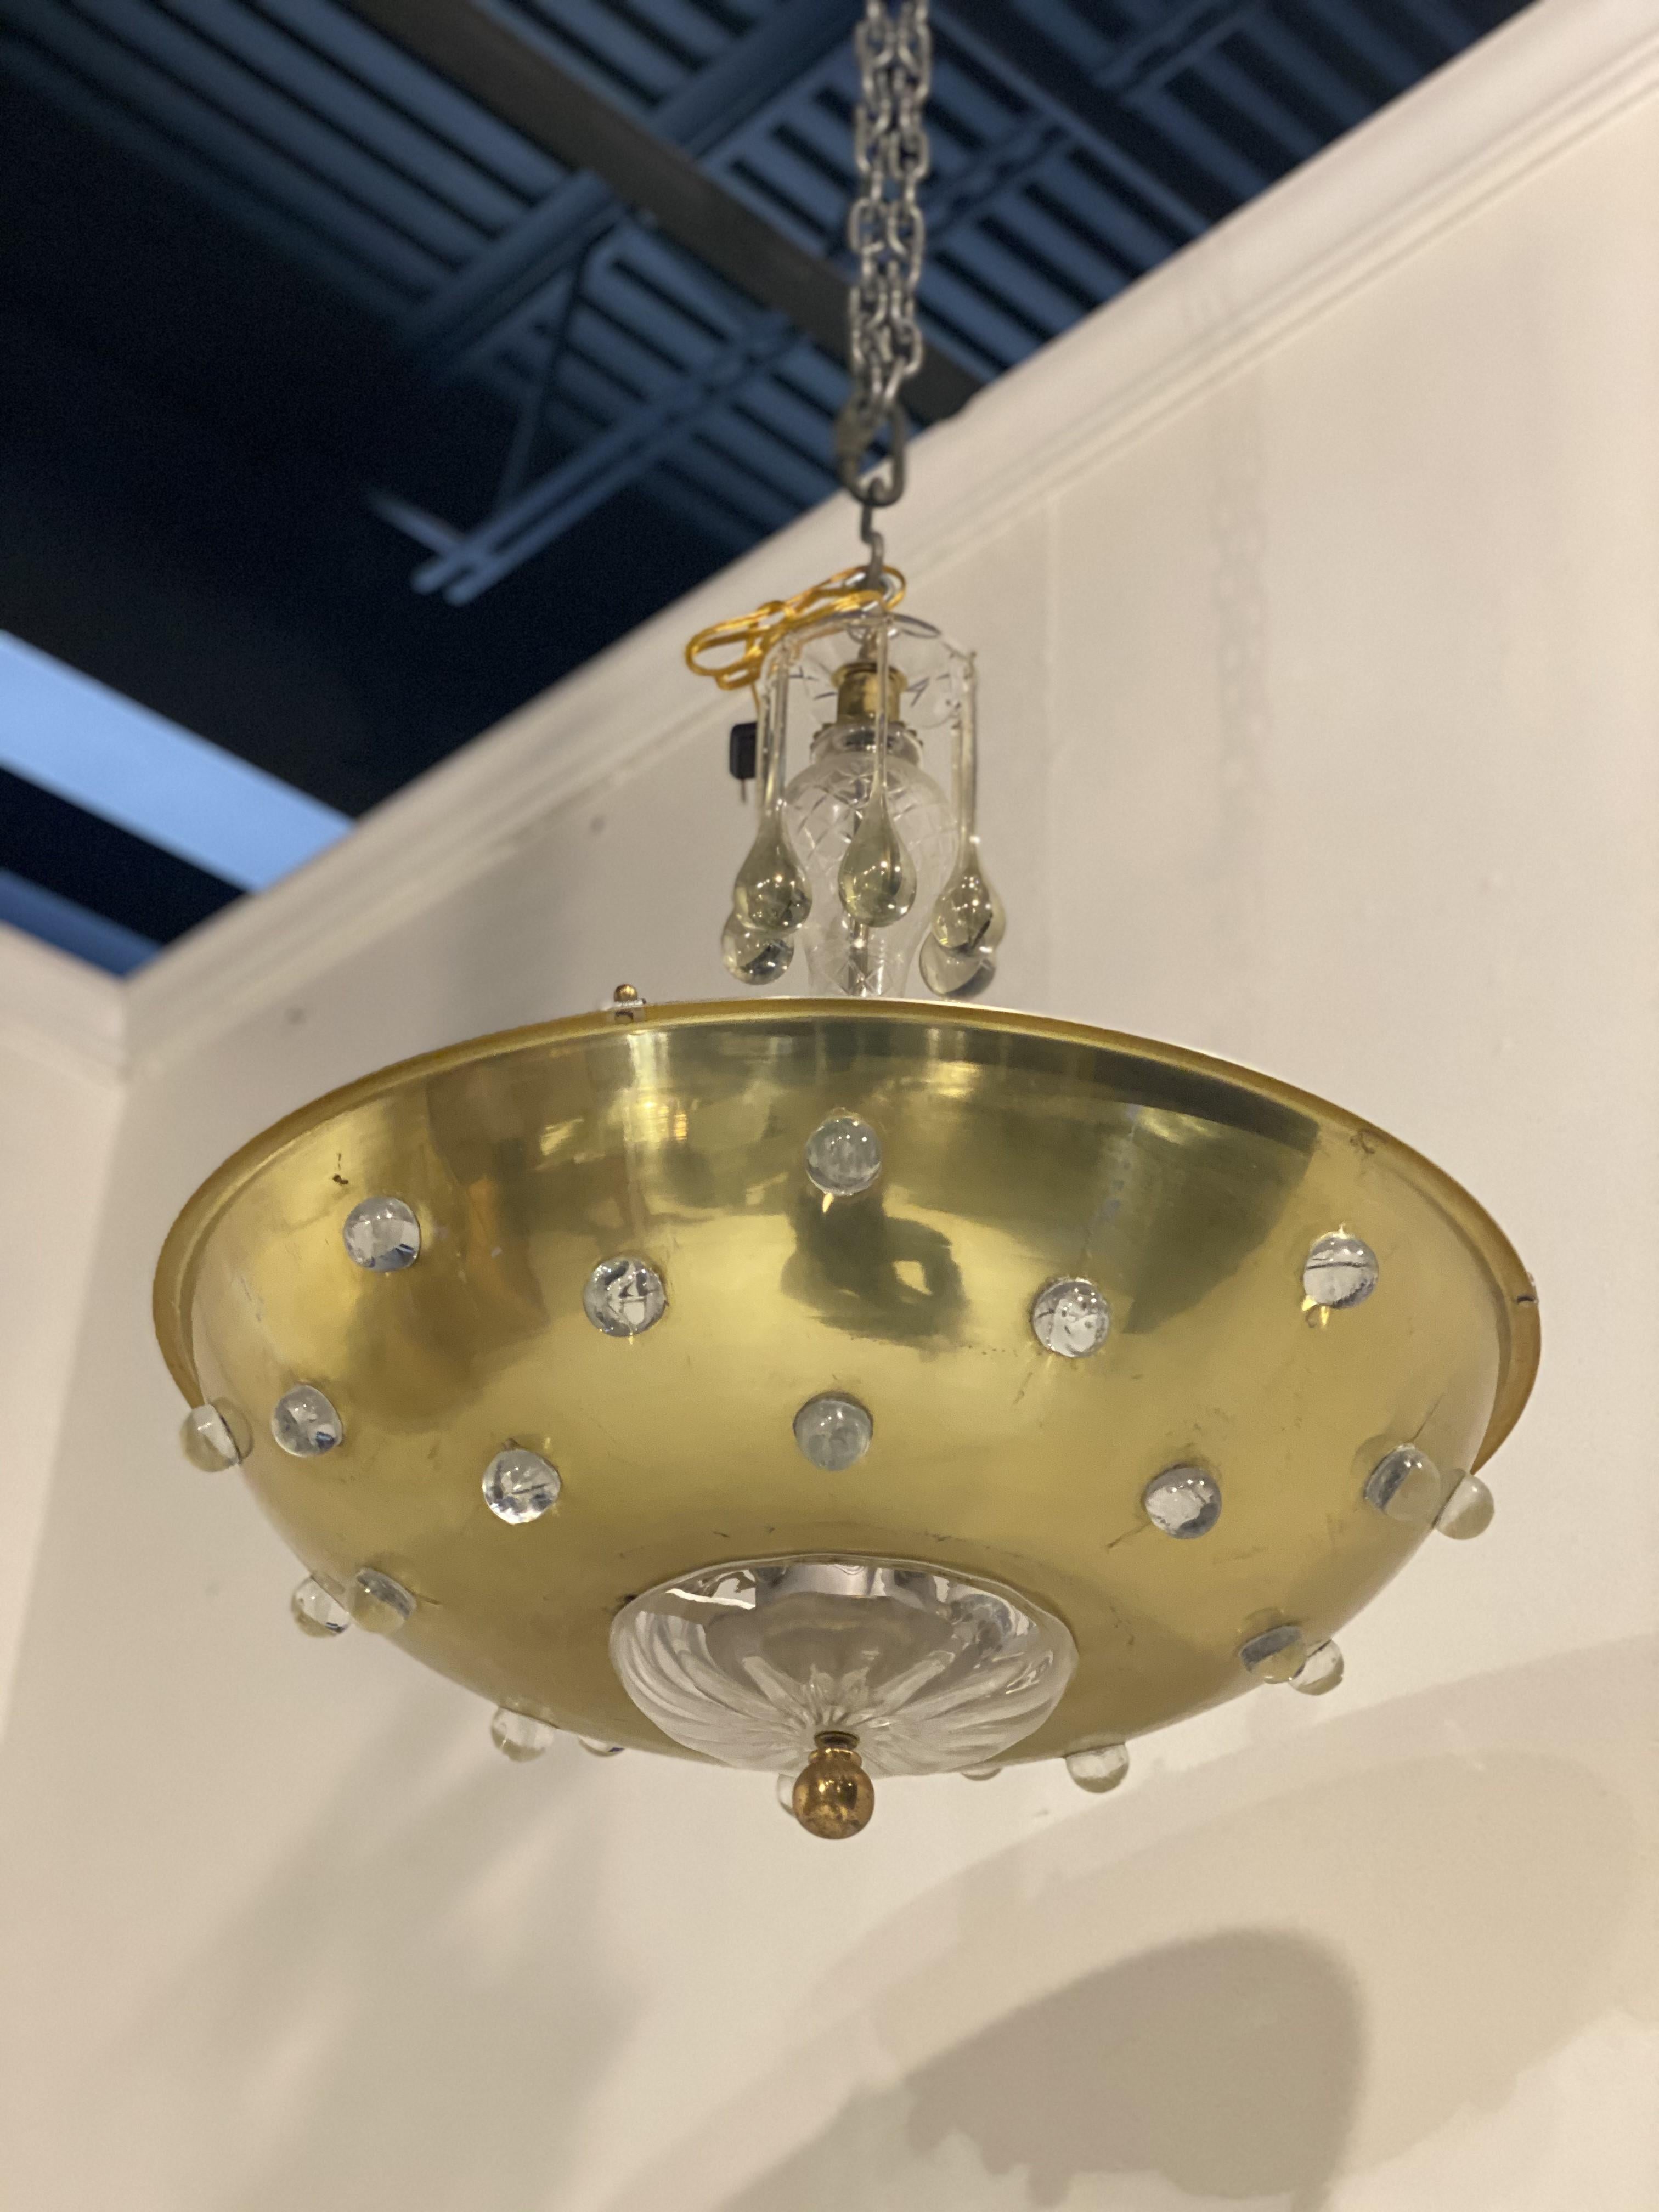 A circa 1940's Austrian gilt bronze light fixture with crystal body atop and crystals on bronze plate, with interior lights.